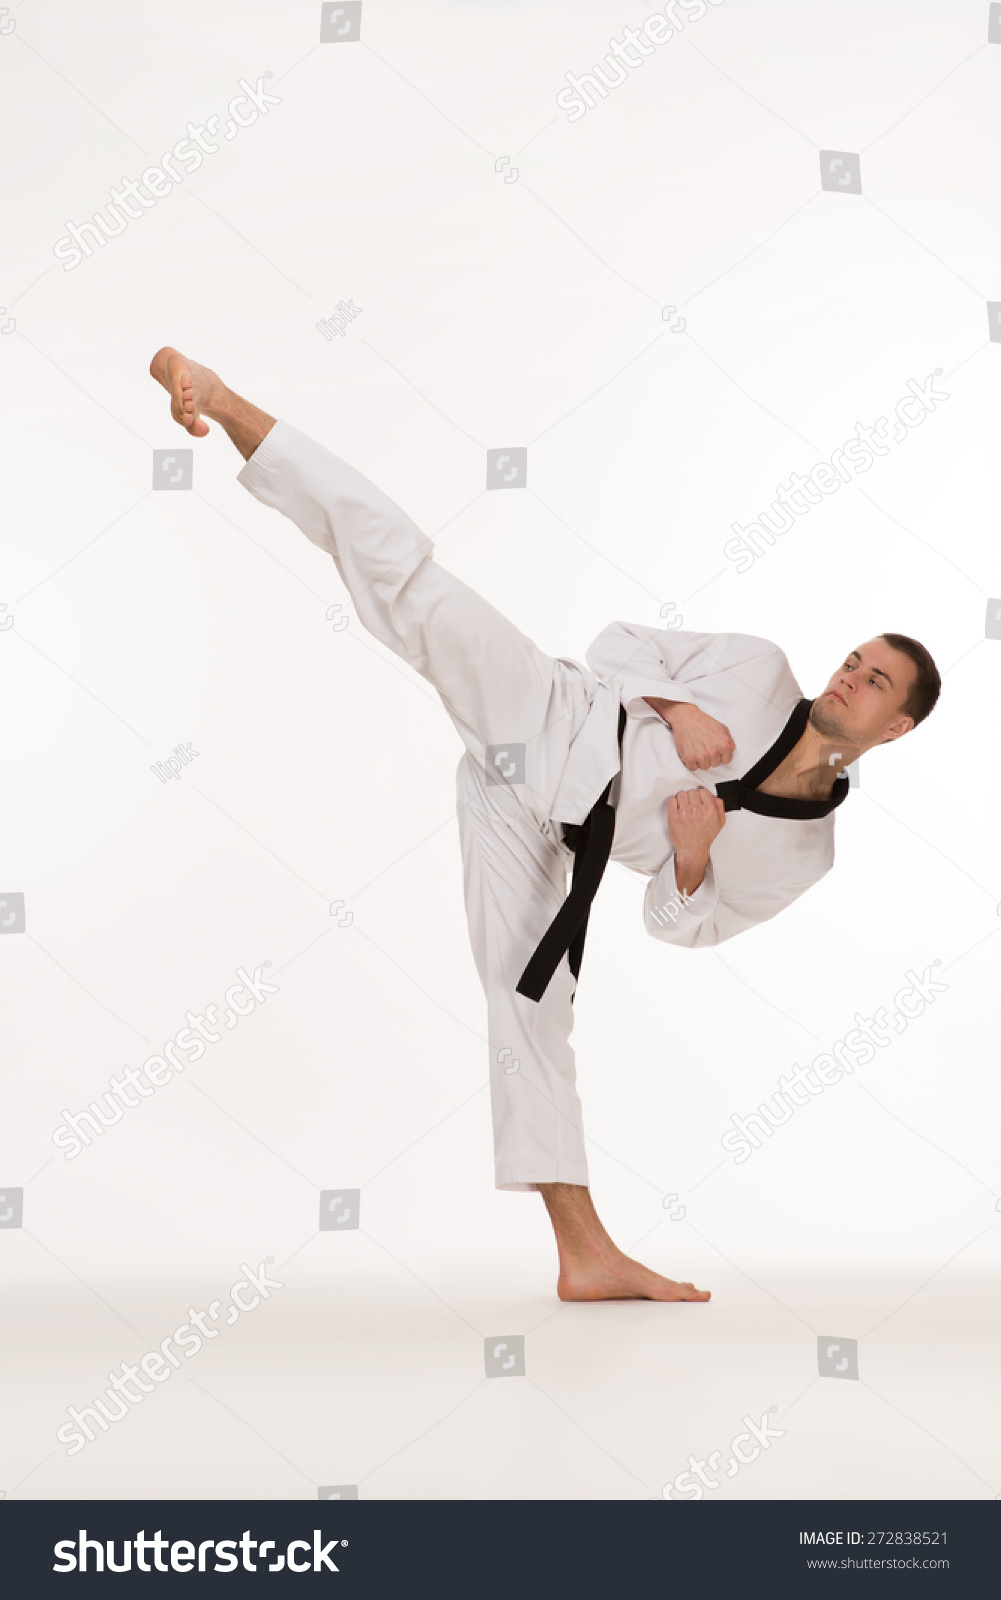 Fighter show foot kick on white background #272838521